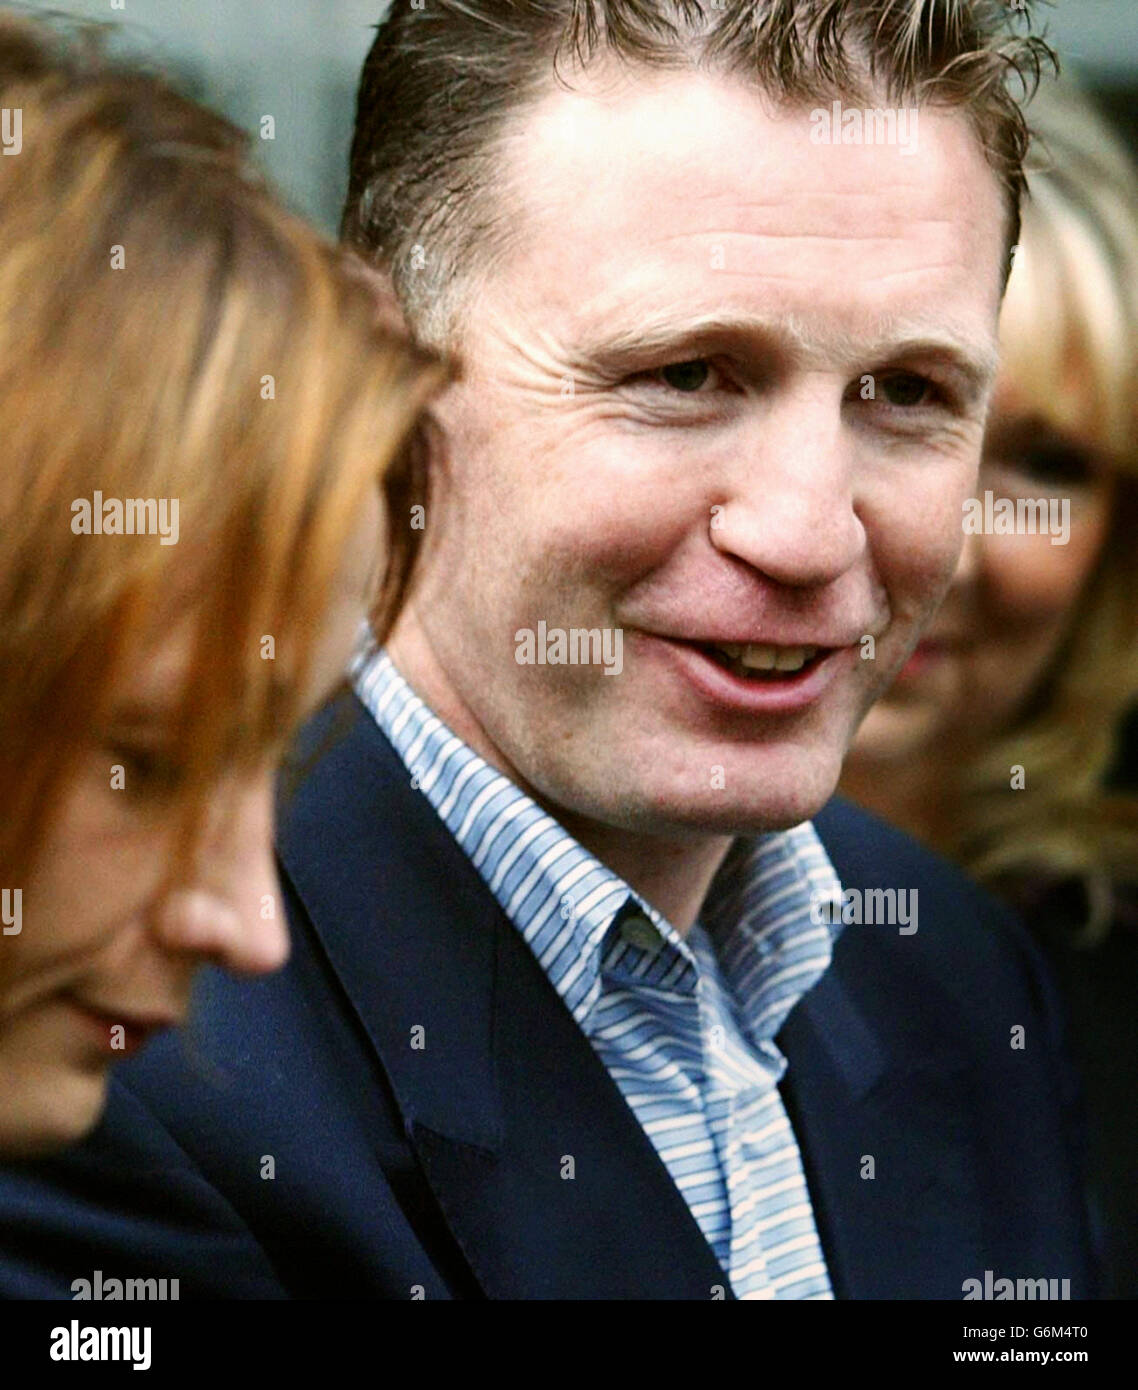 Former world boxing champion Steve Collins, 39, after appearing in Southend Magistrates' Court accused of slamming a fridge door against his girlfriend's head following an argument at their home. The Irishman Collins, 39, is facing a charge of common assault after police were called to his home in Shoeburyness, Essex, last week. Ms Davies, who was in court, left with Collins following the hearing hand-in-hand but the pair refused to comment. Stock Photo